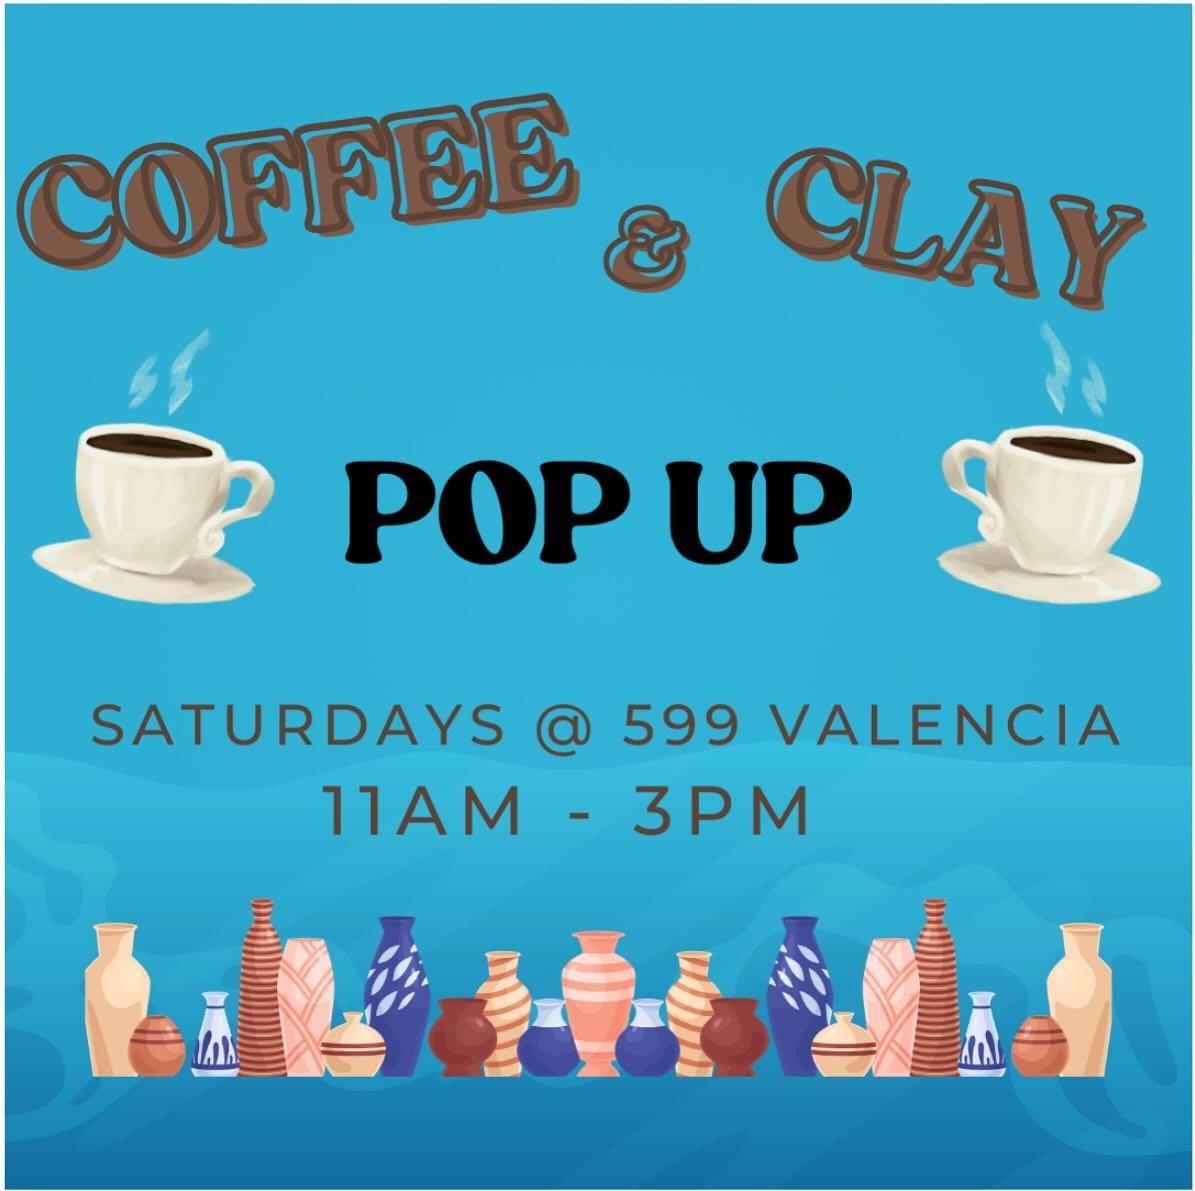 If you&rsquo;re strolling through the Mission this Saturday, stop by the Coffee &amp; Clay Pop-up at The Drawing Room SF Annex and say hello! I&rsquo;ll be there selling my ceramic art alongside other local clay artists and a coffee stand by Abanico 